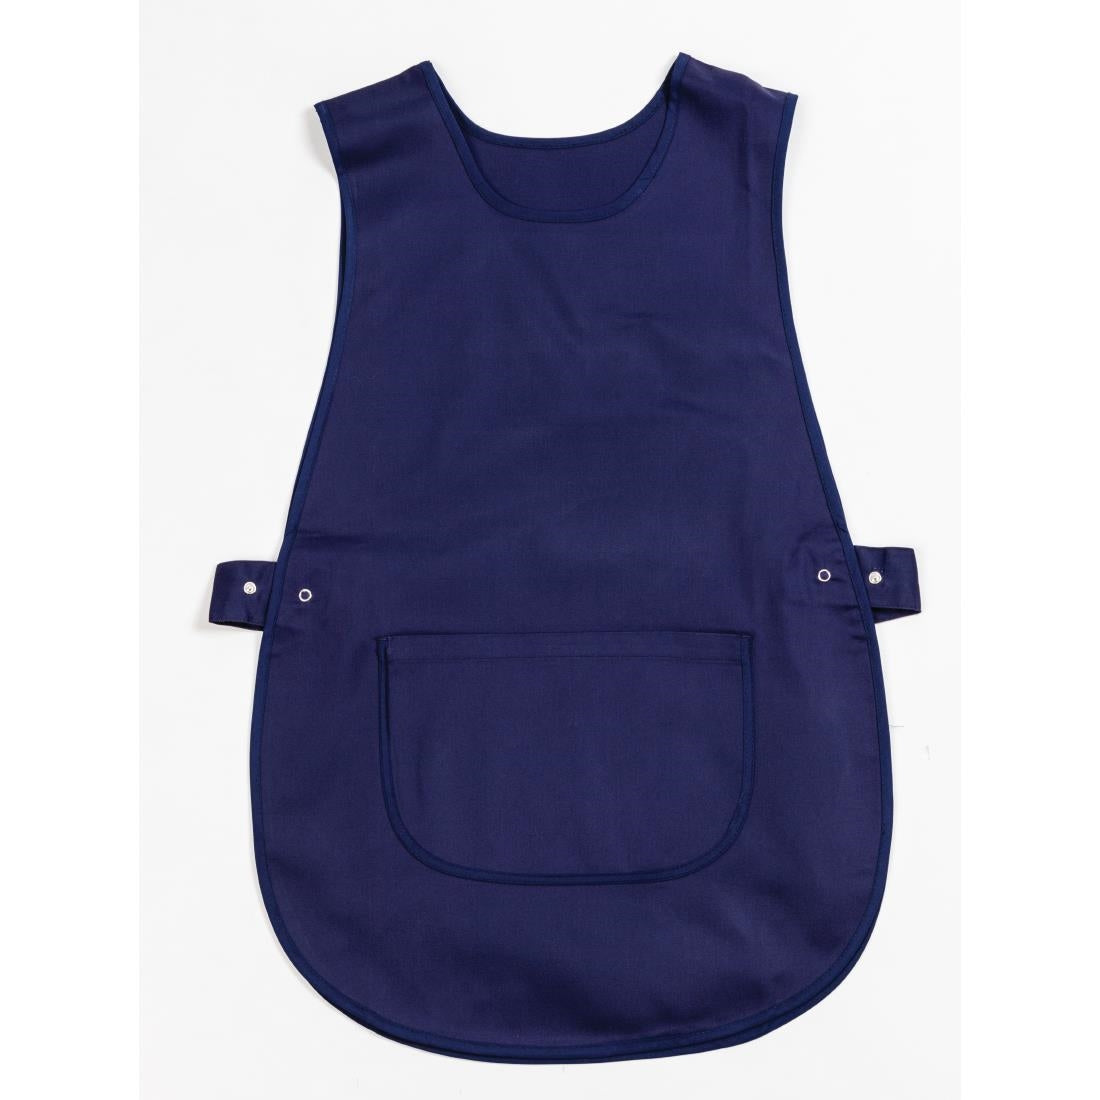 B044 Tabard With Pocket Navy Blue JD Catering Equipment Solutions Ltd